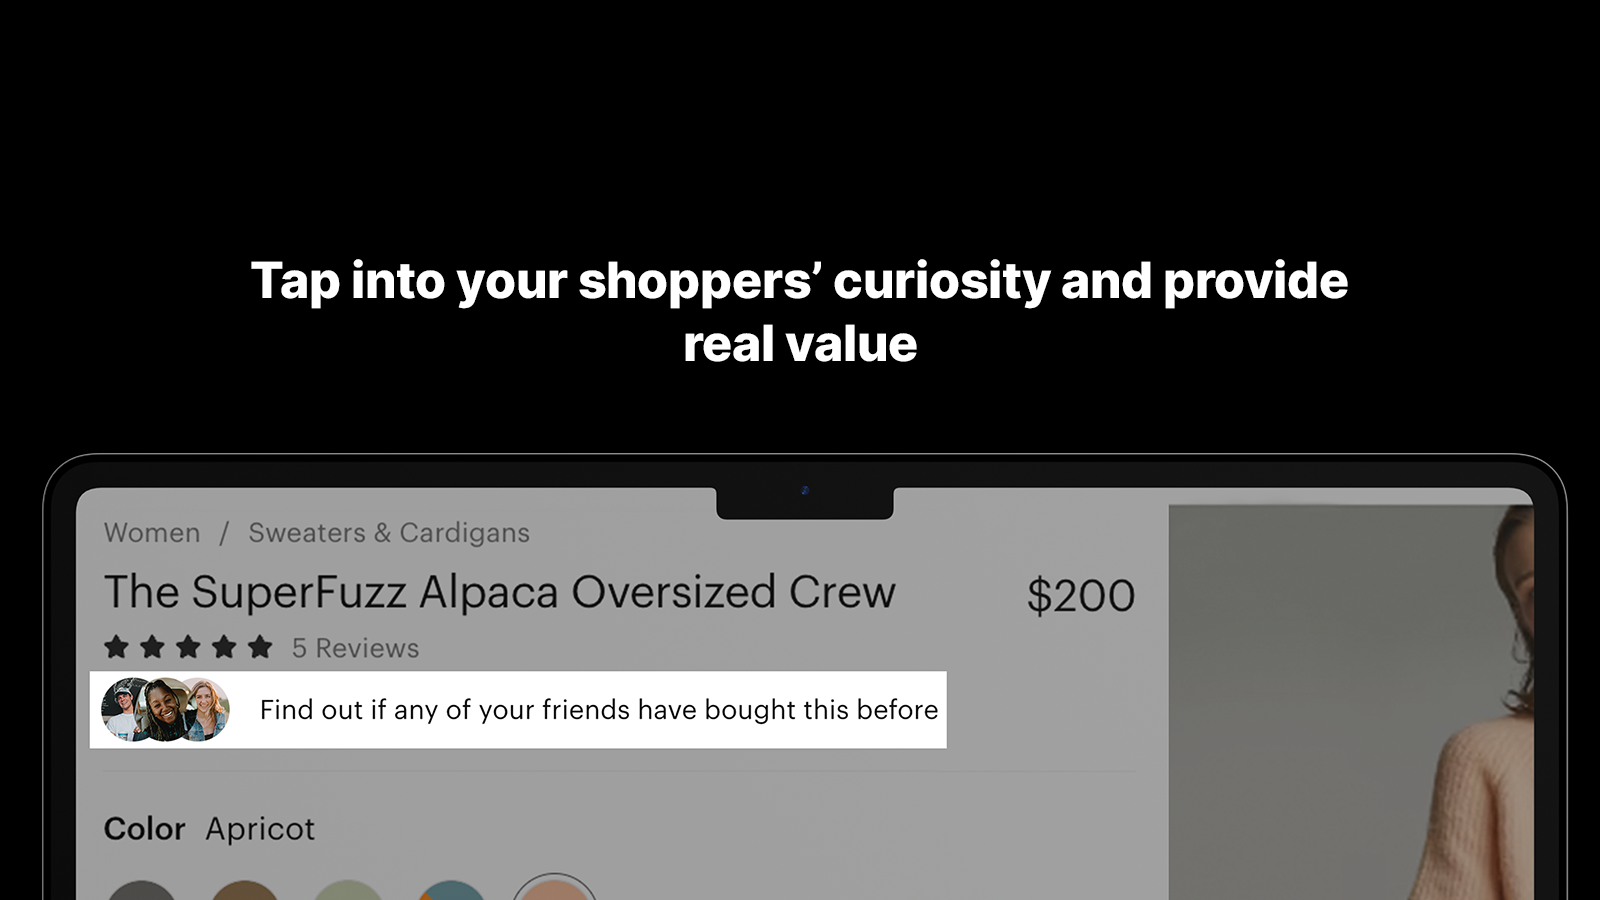 Tap into your shoppers’ curiosity and provide real value